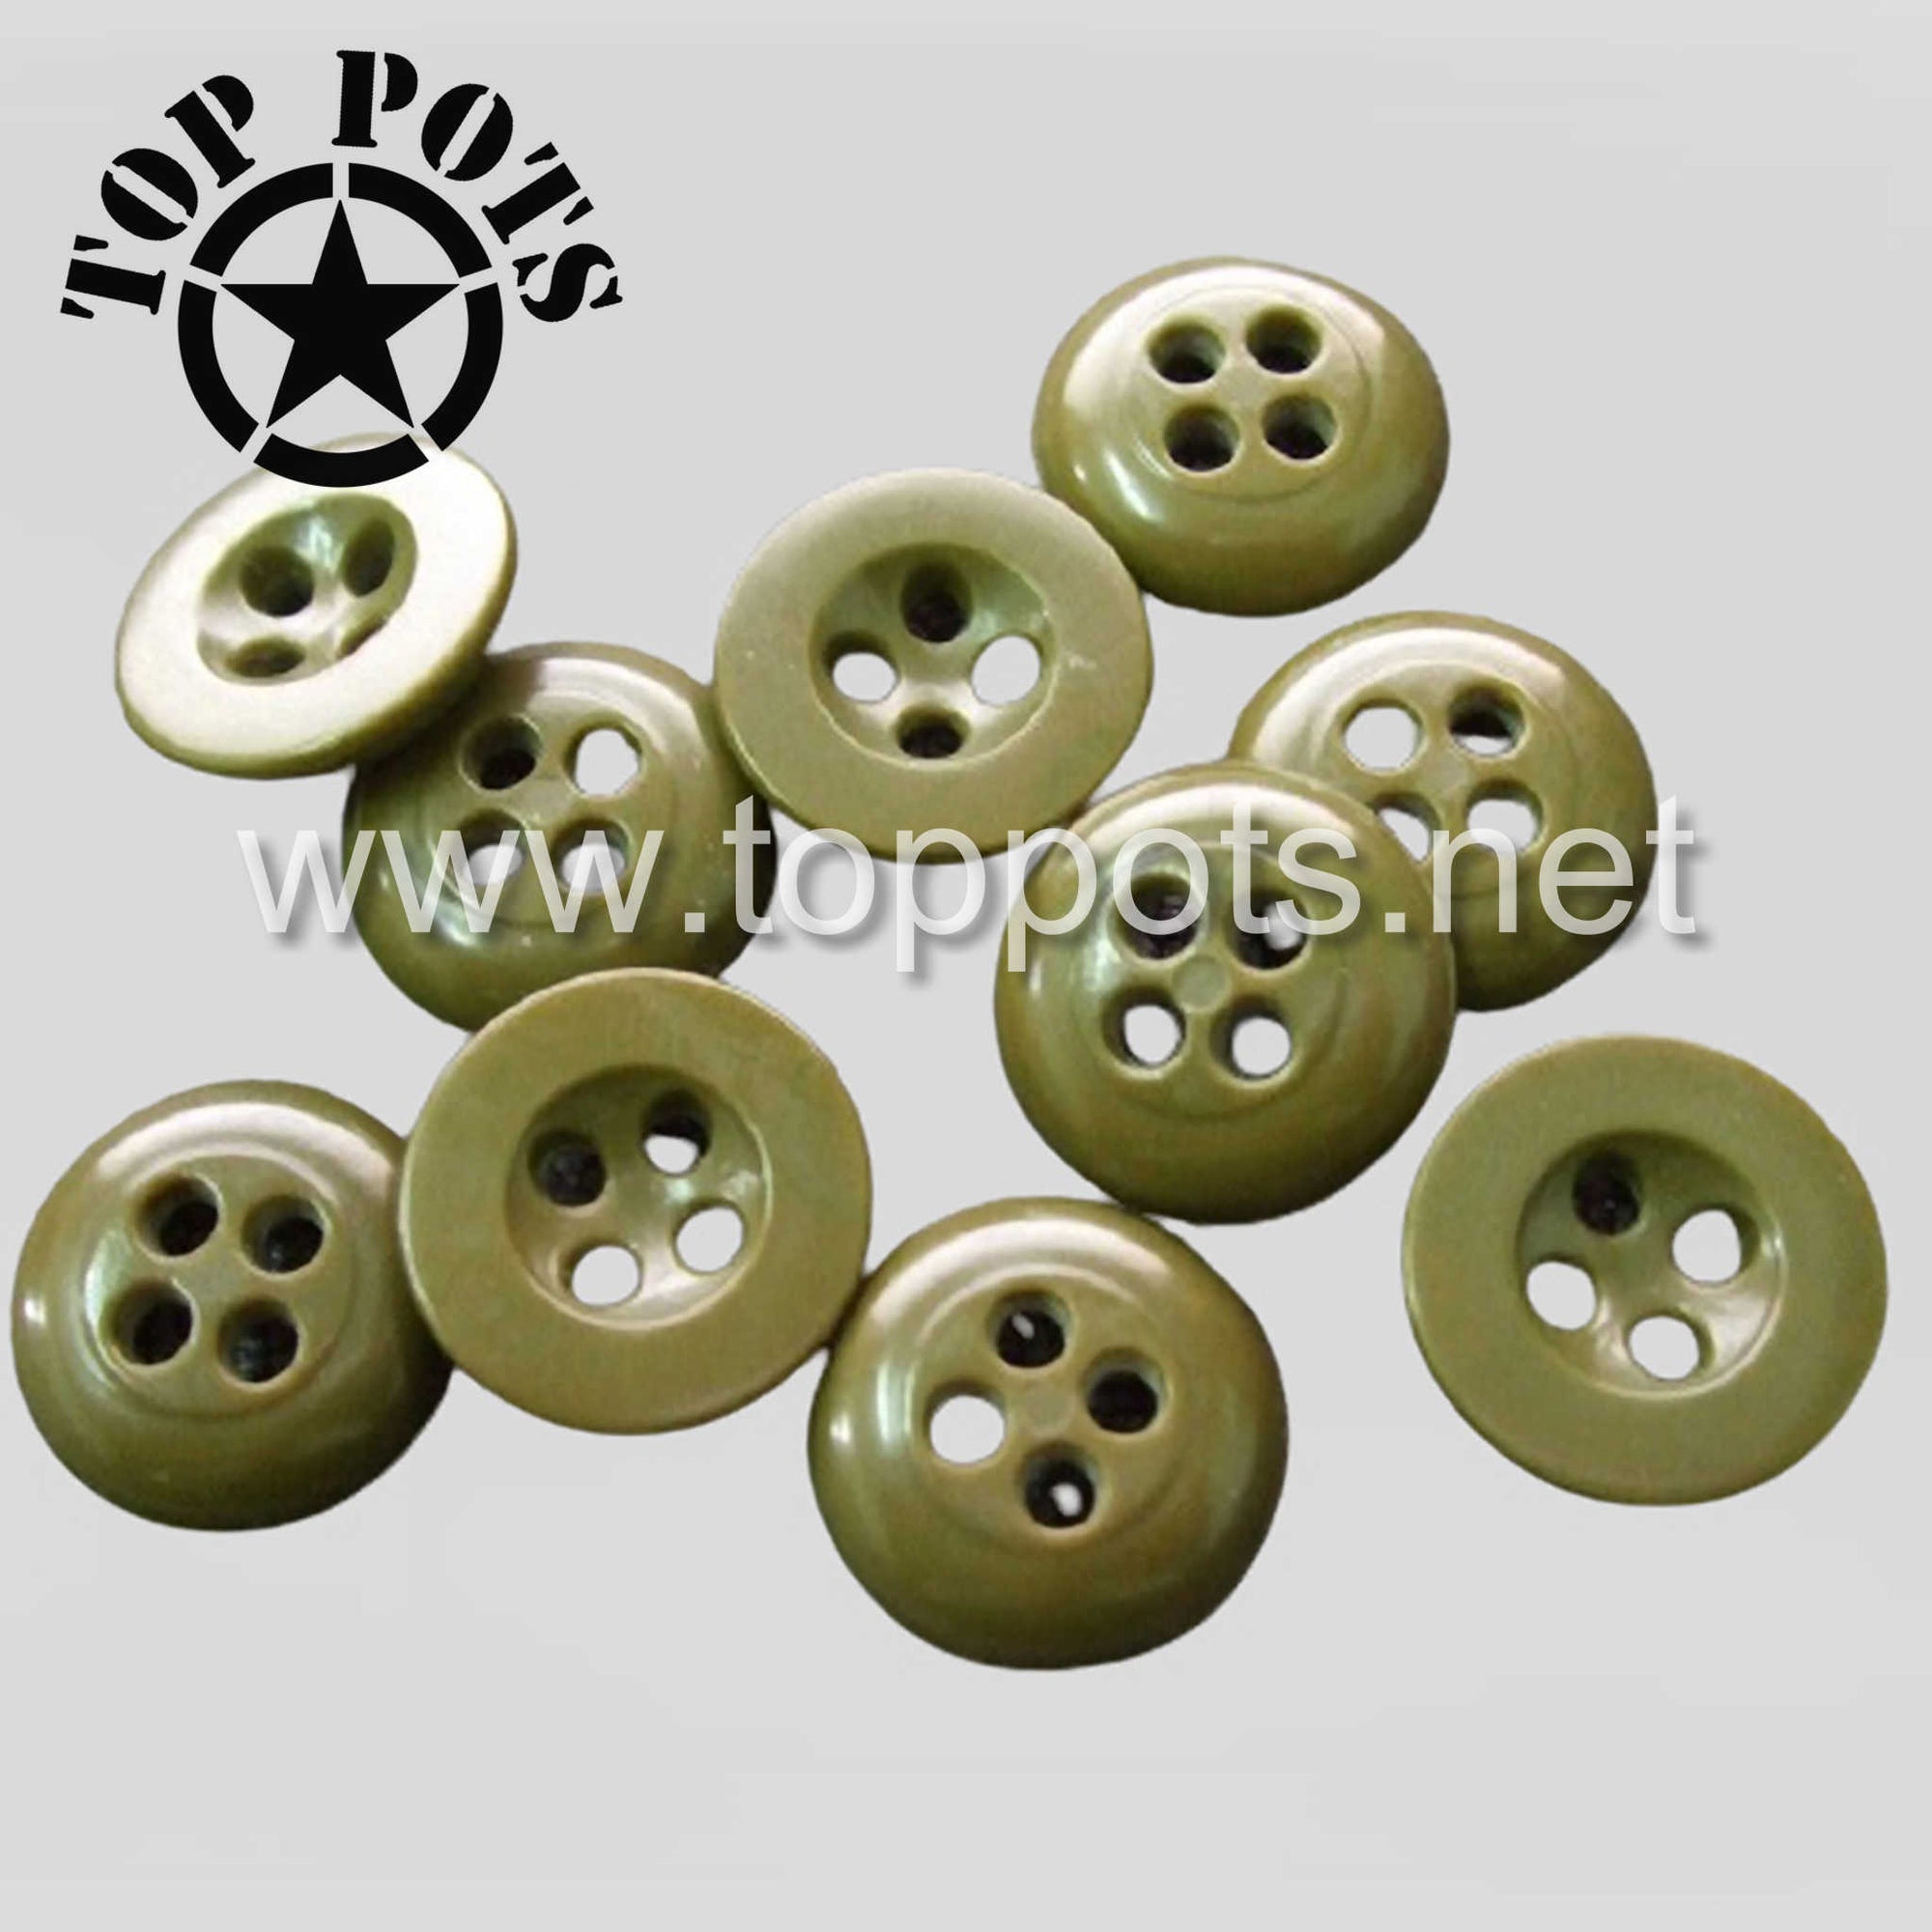 WWII Canadian Army Reproduction M1937 P37 Wool Enlisted Uniform Battledress Jacket & Pant Buttons – Khaki Green (30 Buttons)